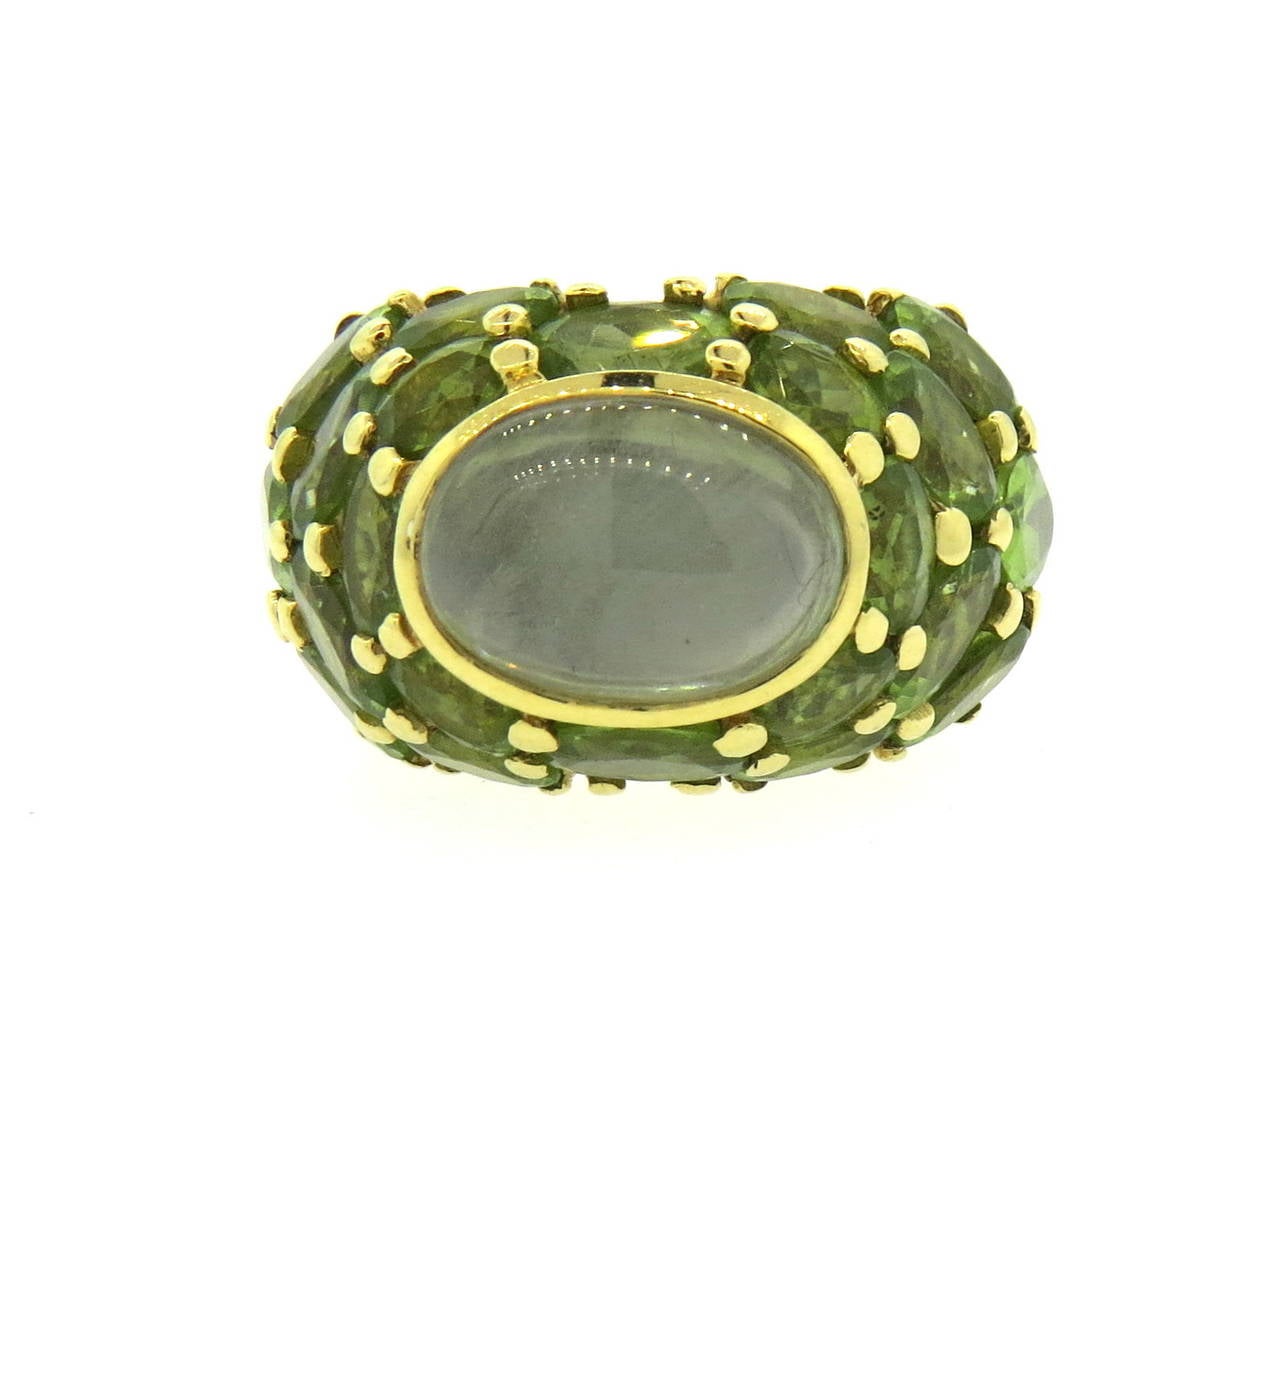 An 18k gold ring set with peridot and a quartz cabochon.  Crafted by Mimi So, the ring is a size 6.5 and 17.5mm wide.  It sits 12.2mm from finger and weighs 23.3 grams.